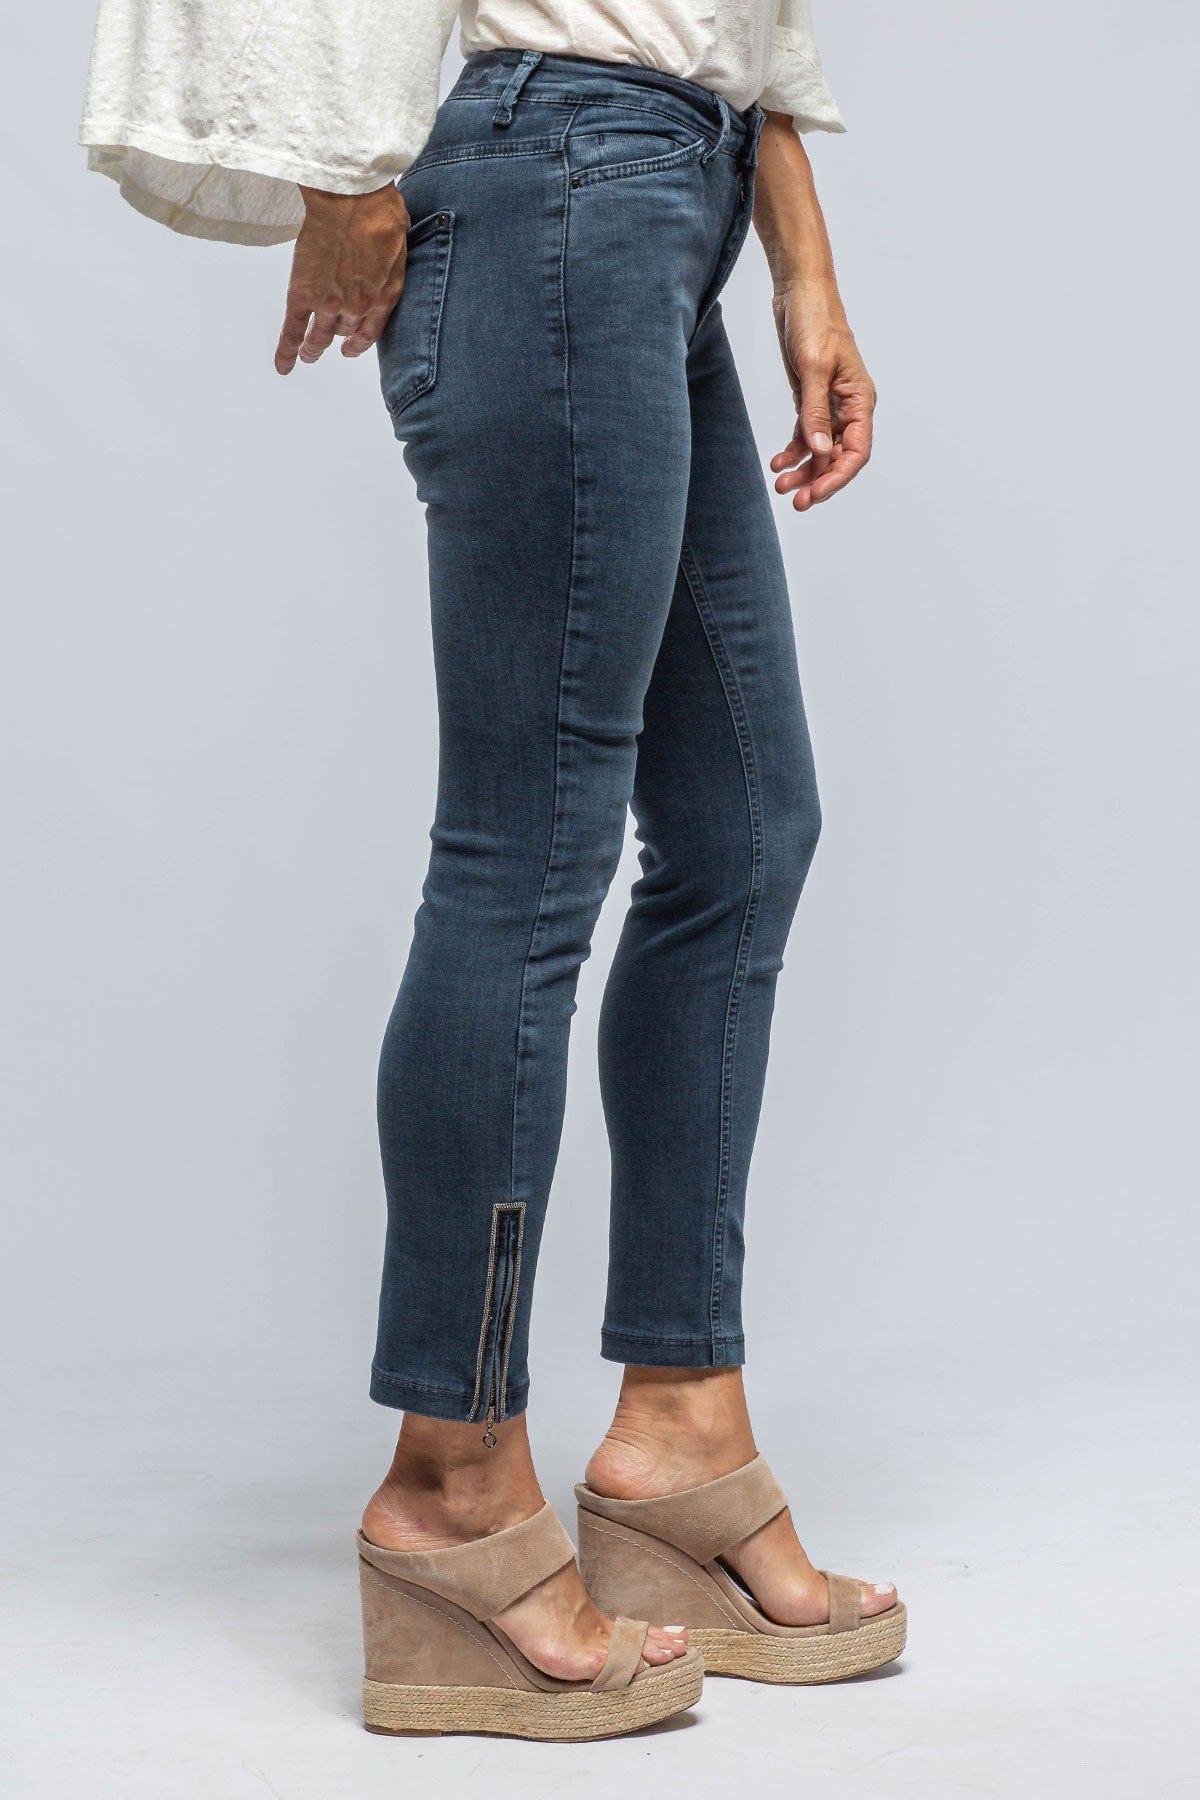 MAC Jeans  Women's Dream Jeans Online at Axel's